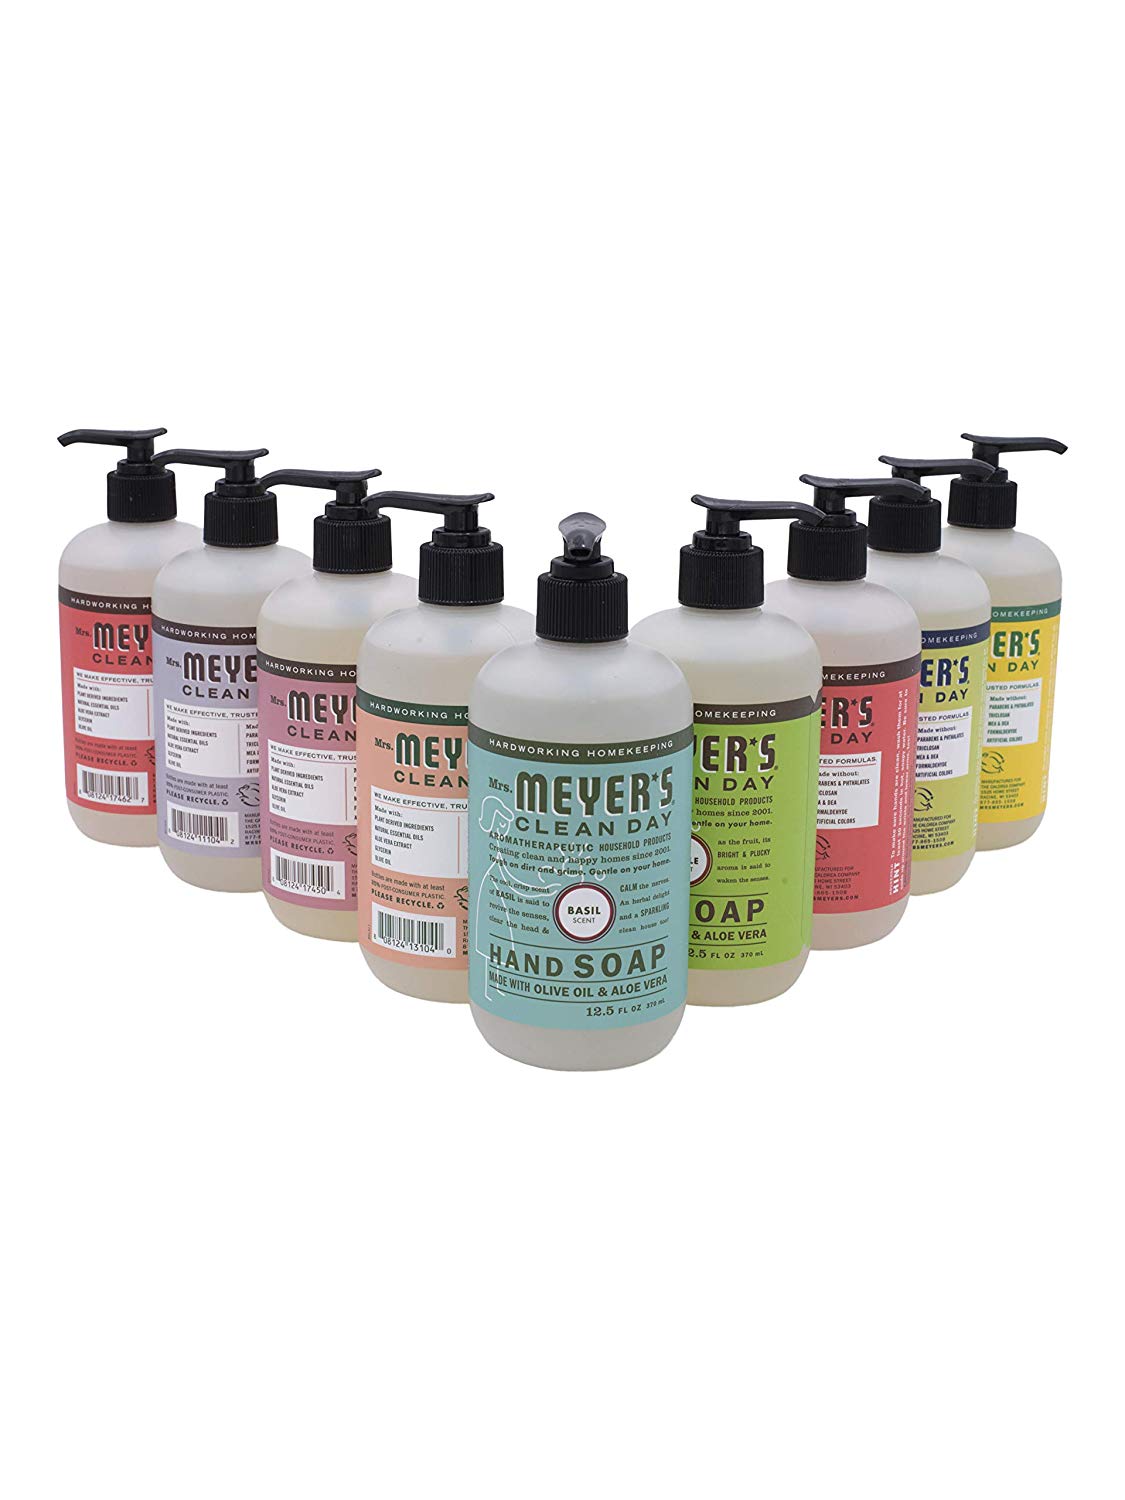 Mrs. Meyers Clean Day Liquid Hand Soap Assorted Scent Variety (Pack of 9) - 12.5 oz Each